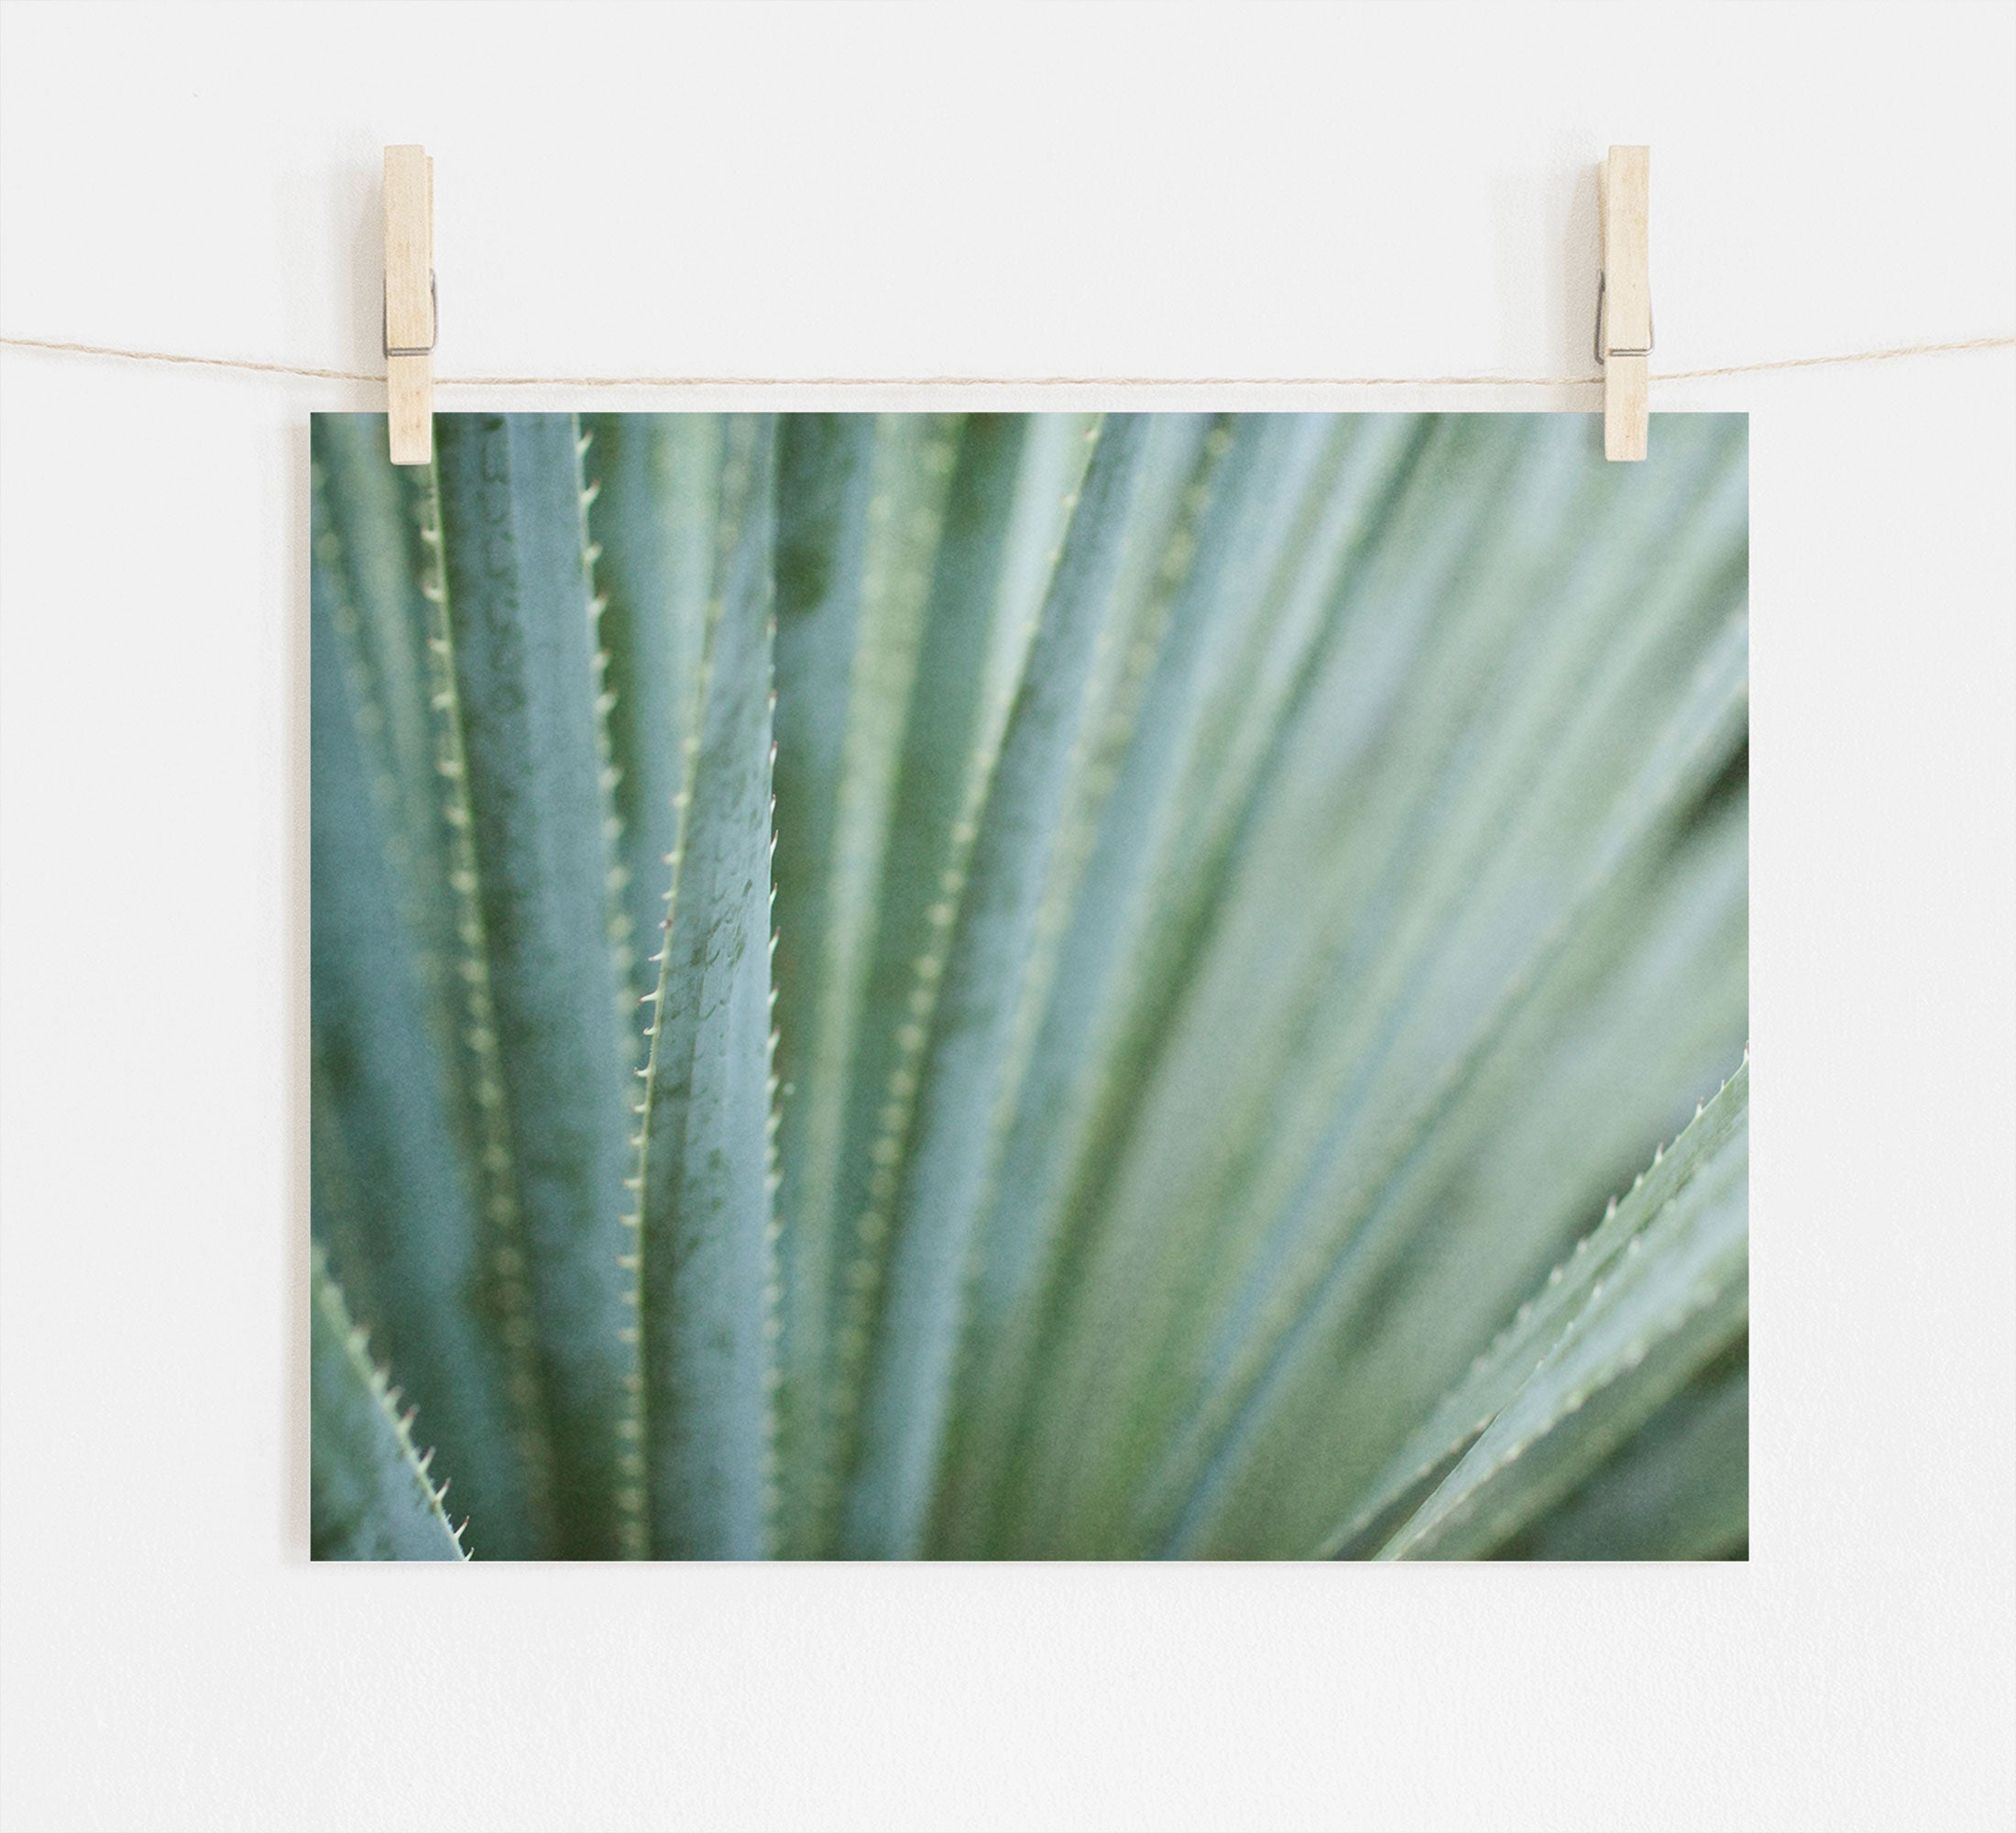 A close-up photo of a green agave plant with spiky leaves, displayed on archival photographic paper and clipped to a string with wooden clothespins, featuring the Abstract Green Botanical Print 'Strands and Spikes' by Offley Green.